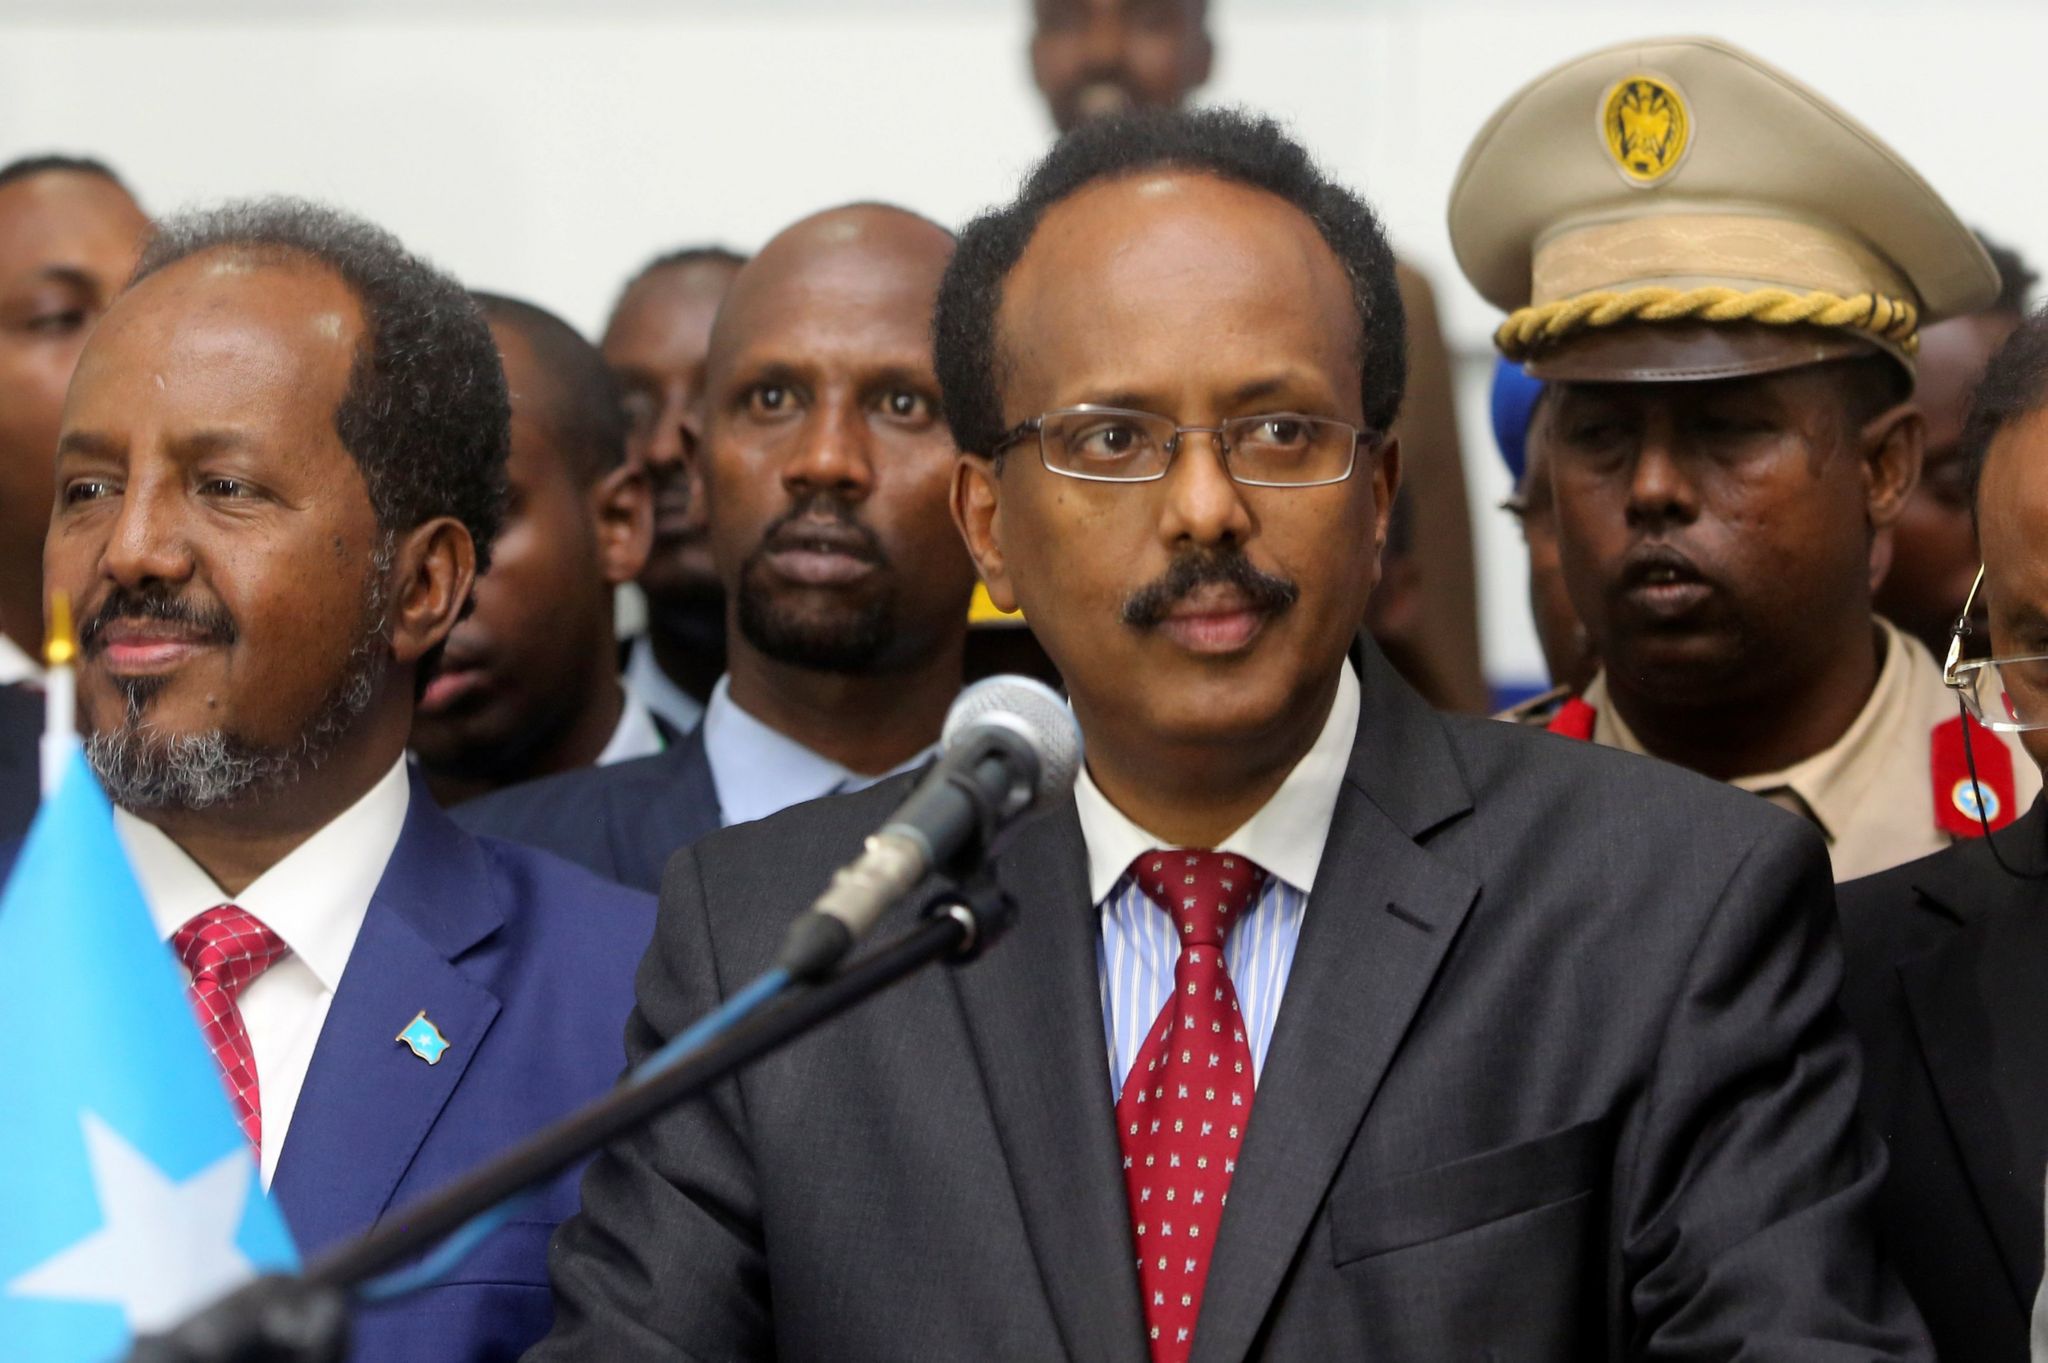 Somalia's newly elected President Mohamed Abdullahi Farmajo flanked by outgoing president Hassan Sheikh Mohamud (L) addresses lawmakers after winning the vote at the airport in Somalia's capital Mogadishu, 8 February 2017